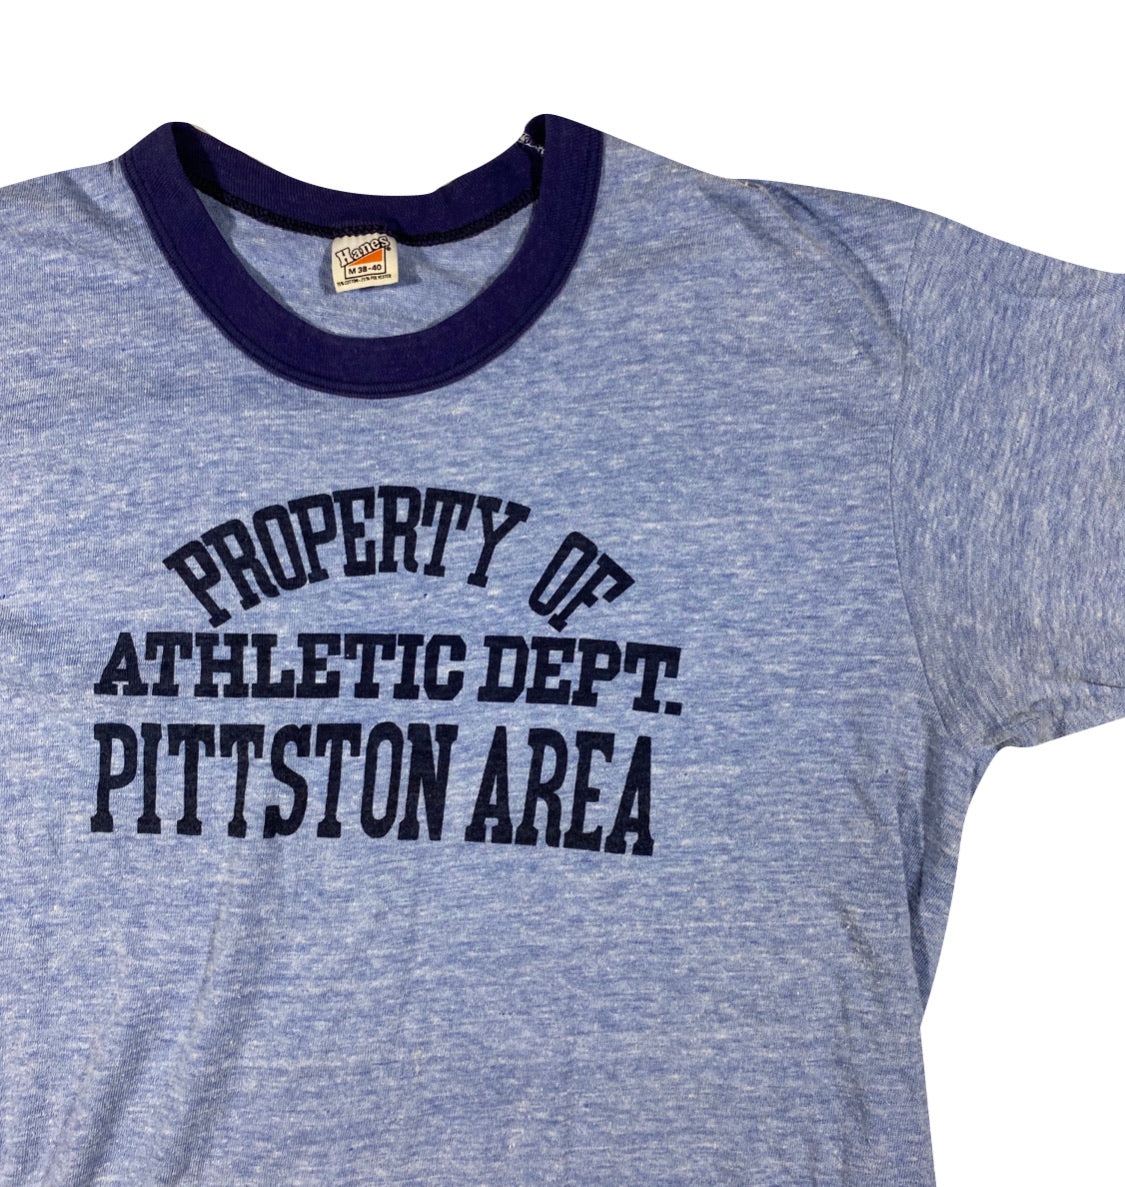 70s Pitston area athletic dept ringer tee. Small fit